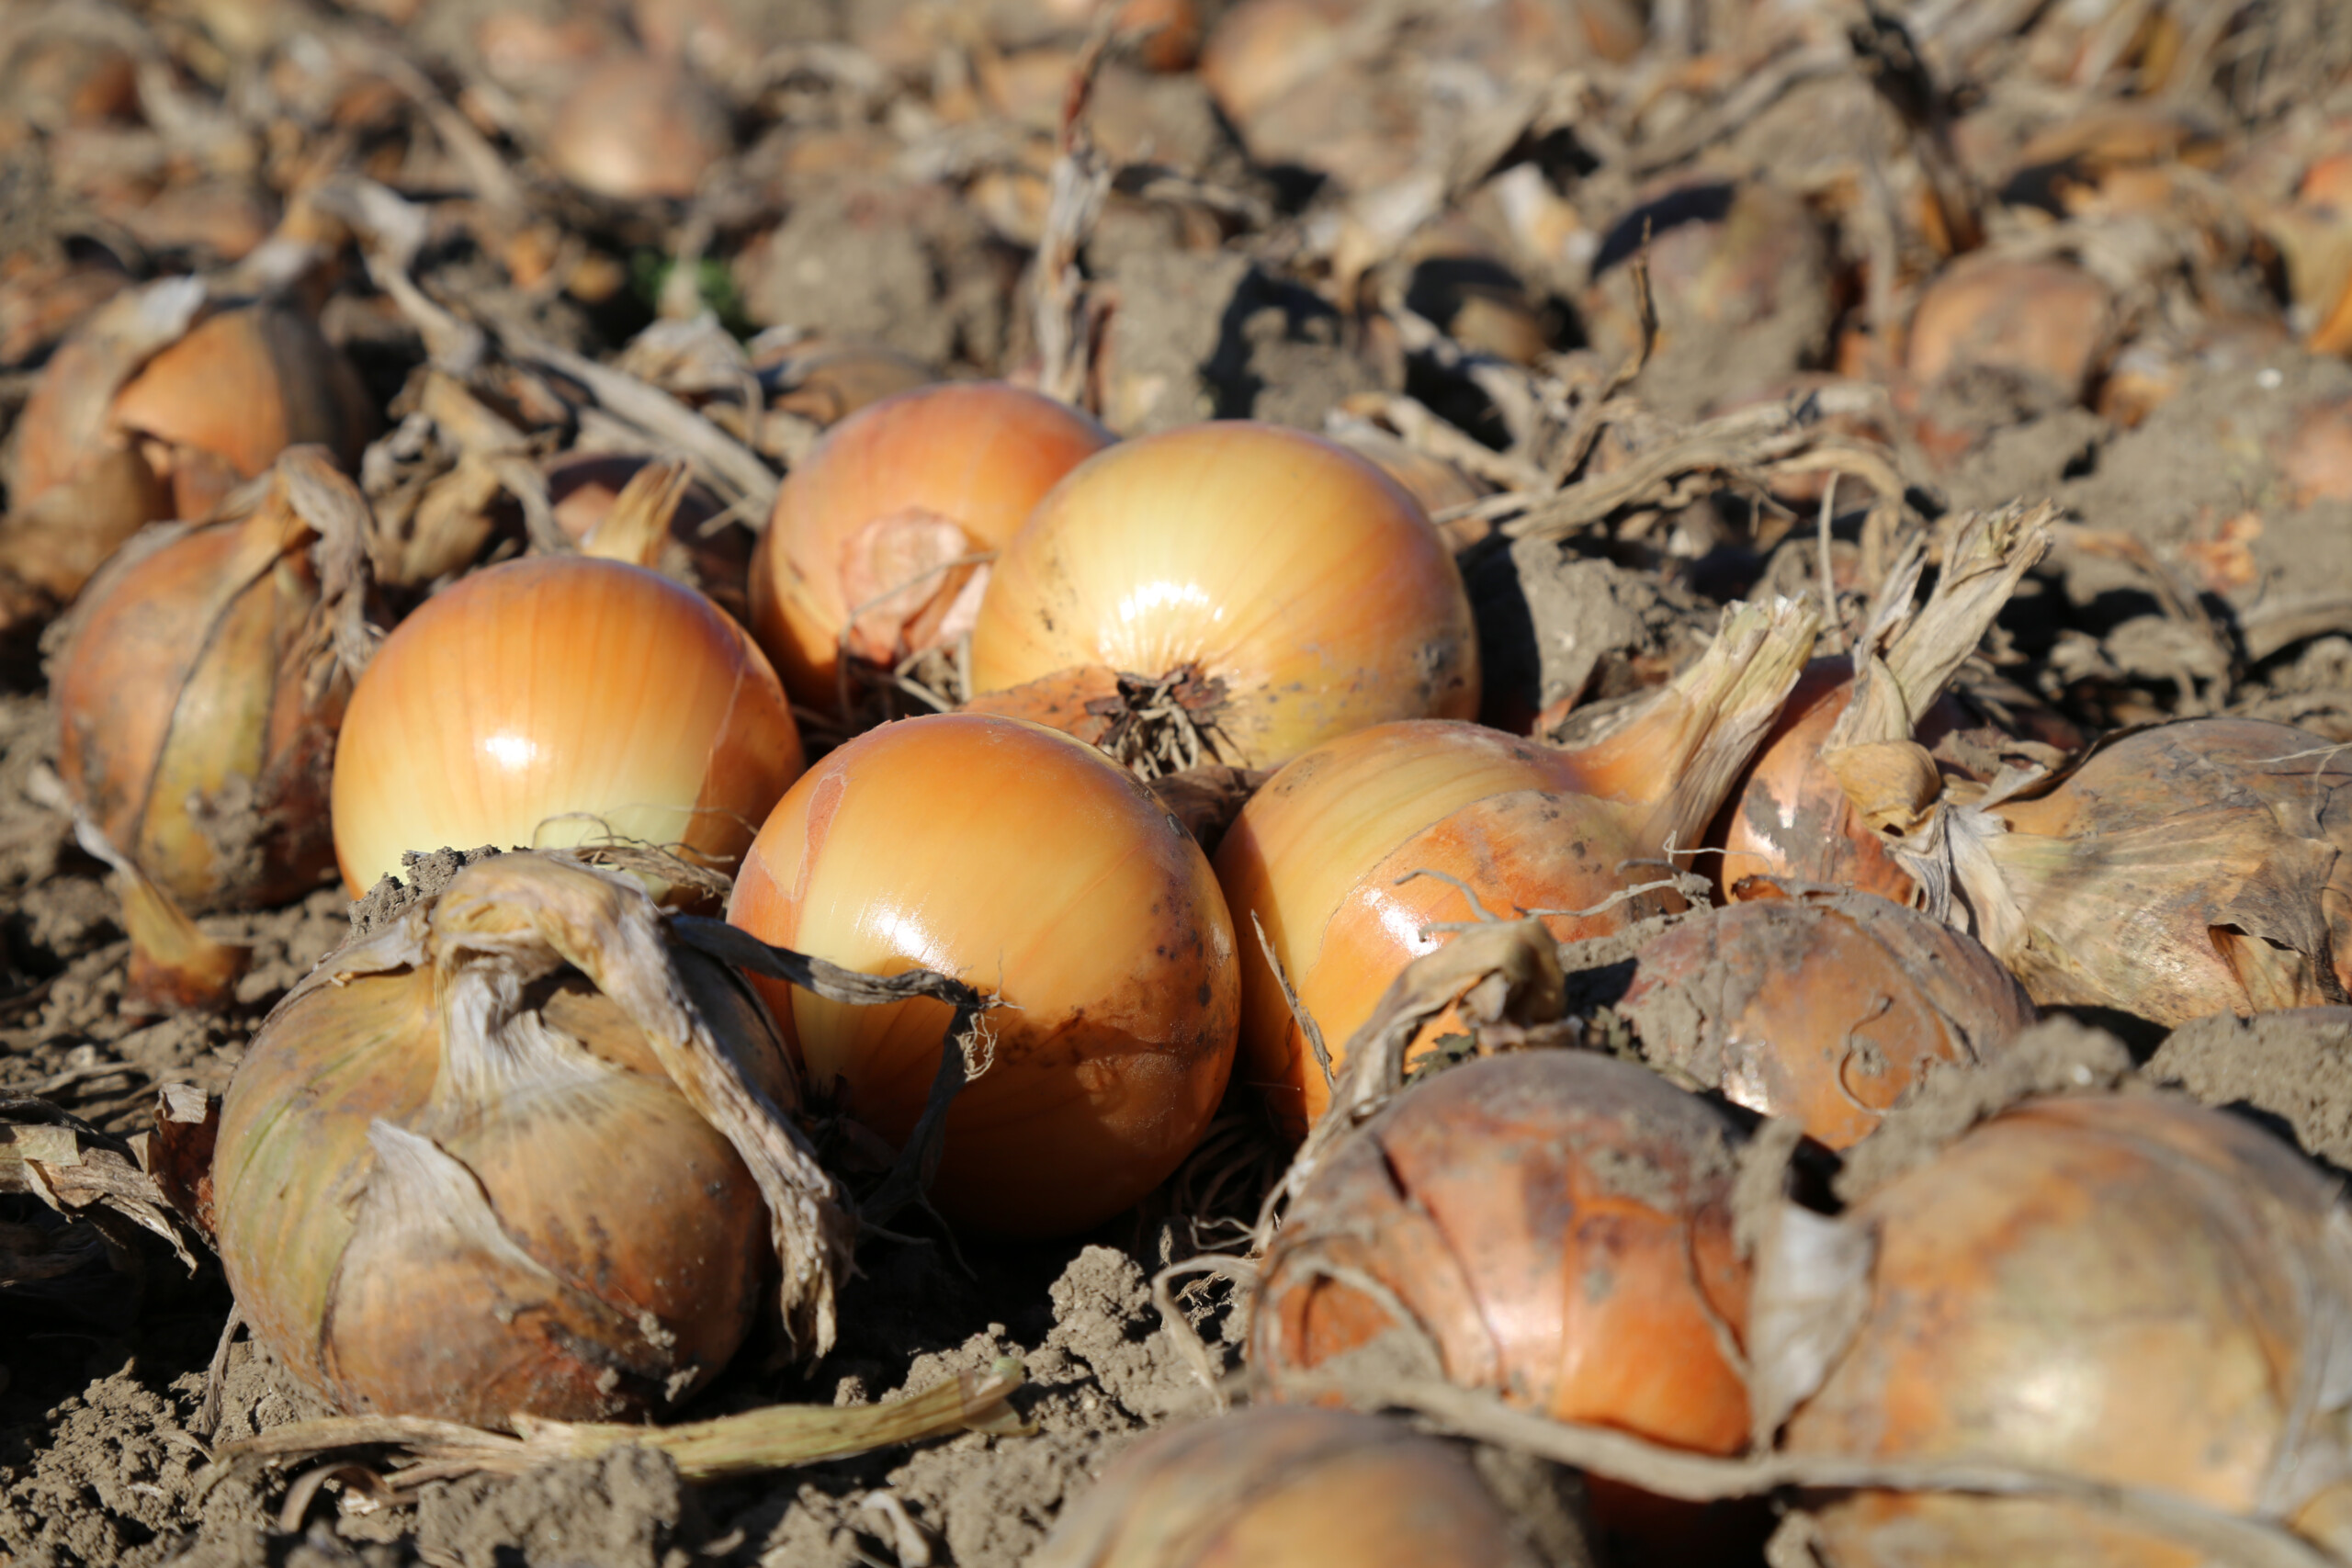 Dormo, under the right conditions, the firmest onion with the best skin retention in the Rijnsburger range.